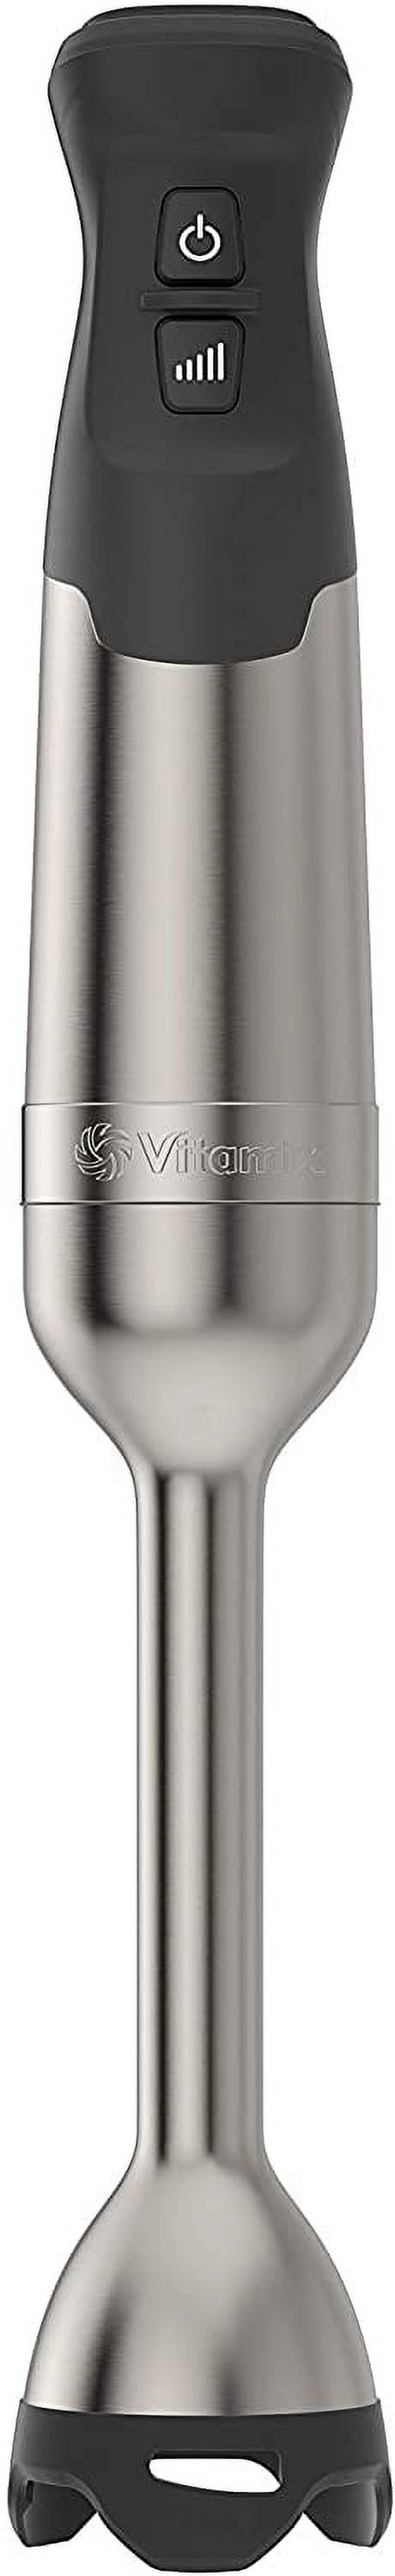 durable Vitamix Immersion Blender Stainless Steel 18 inches - Walmart.com